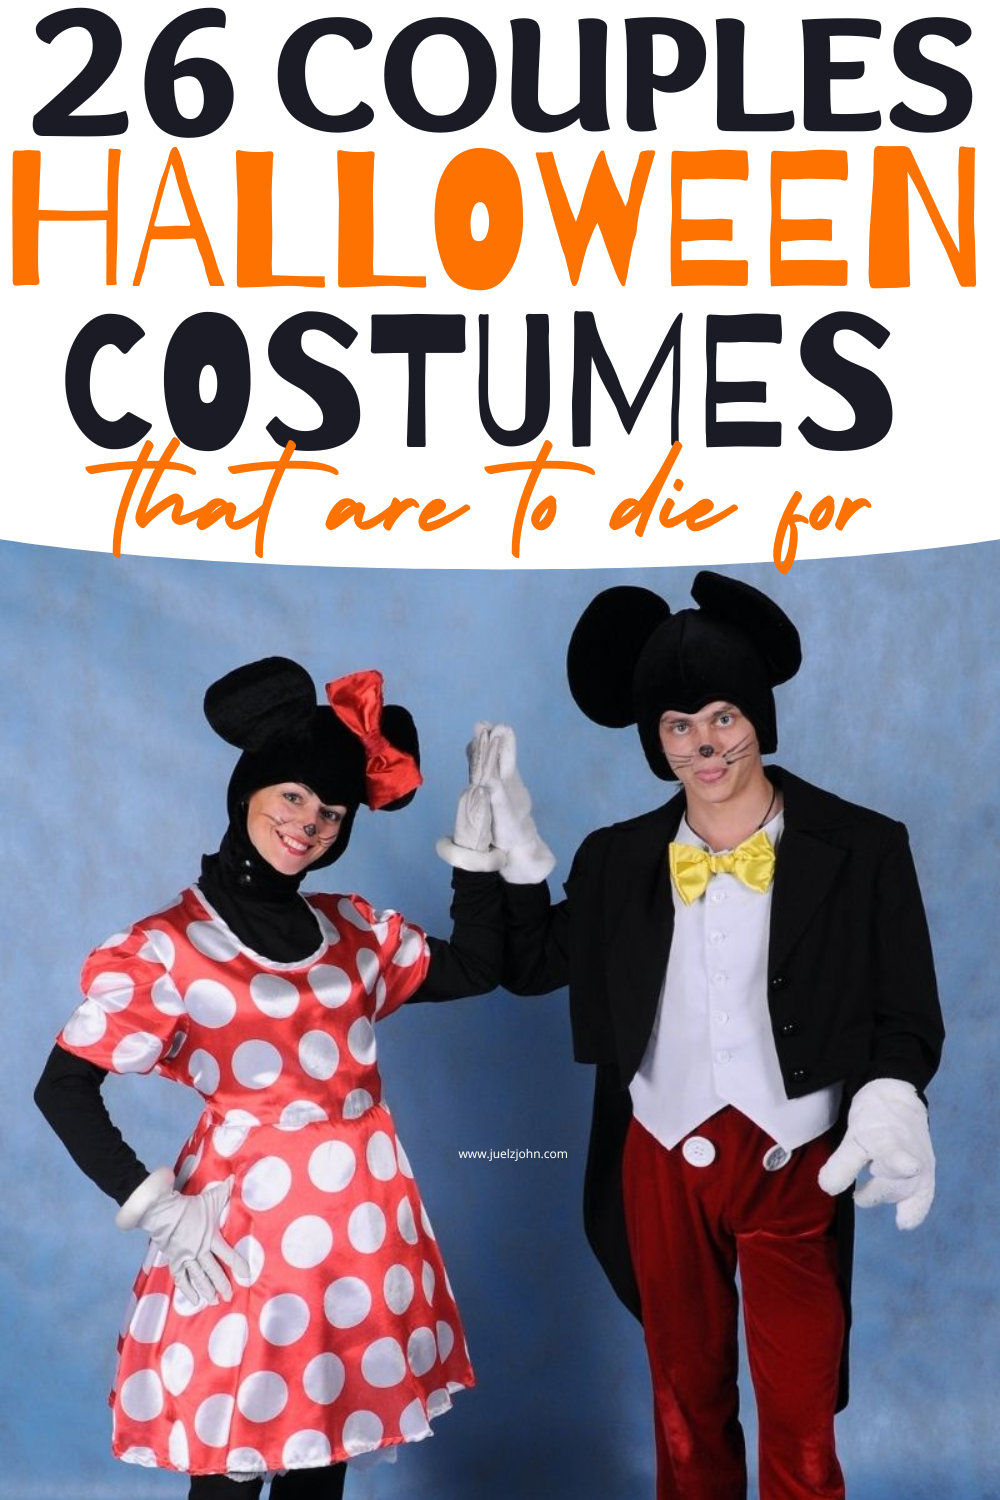 26 Couples Halloween costumes that’ll make you stand out - juelzjohn